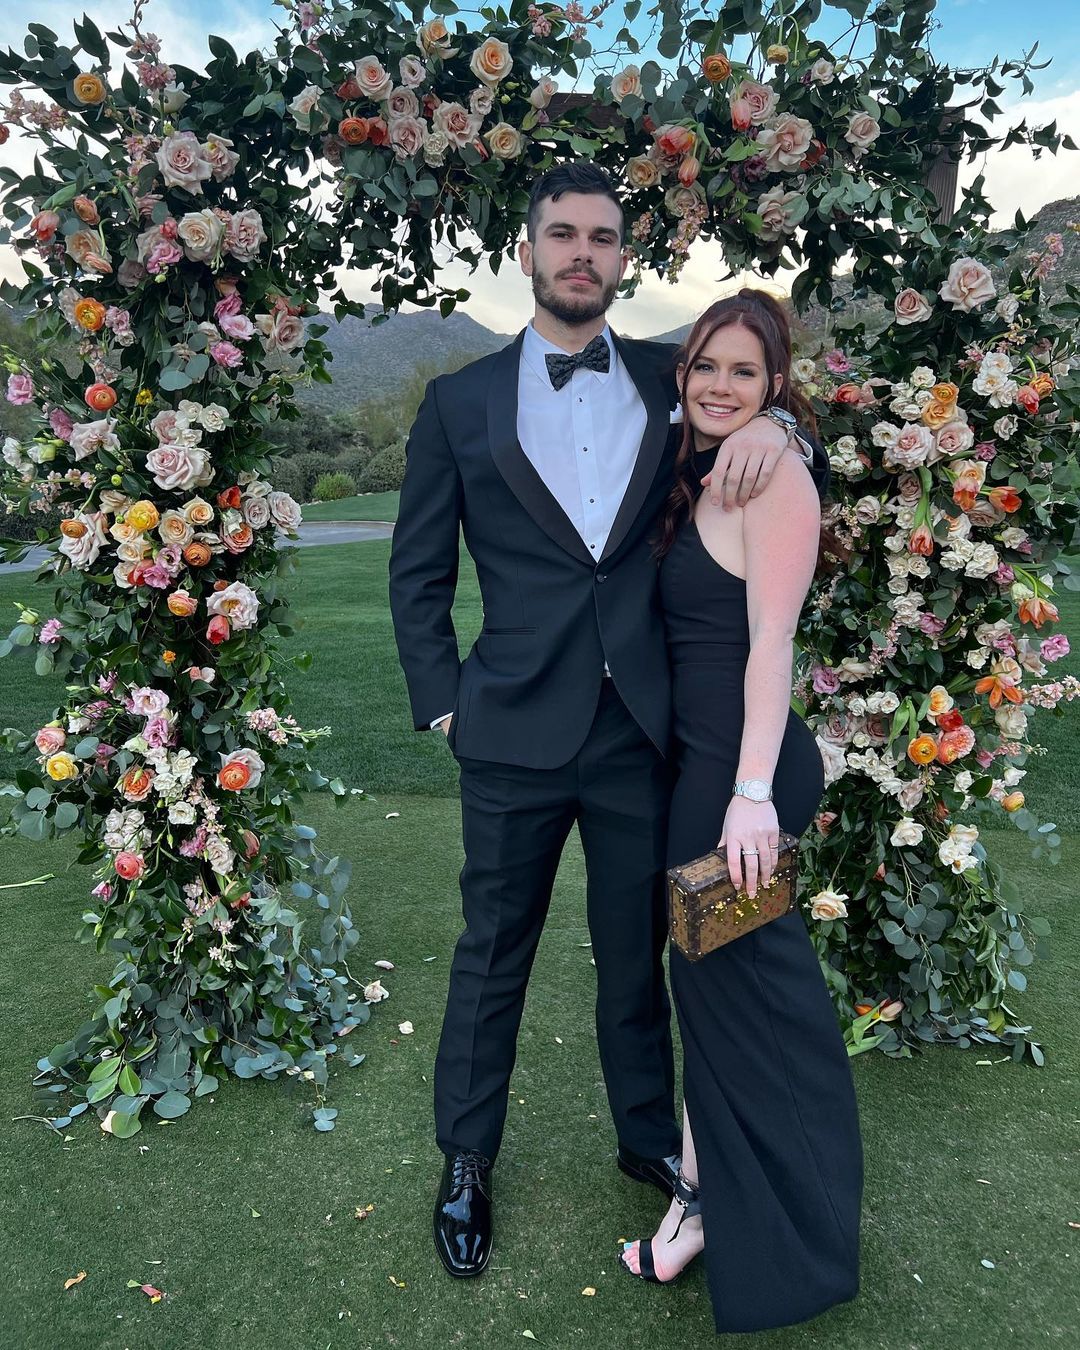 Who is Rebekah, Girlfriend of Dylan Cease? His parents, family